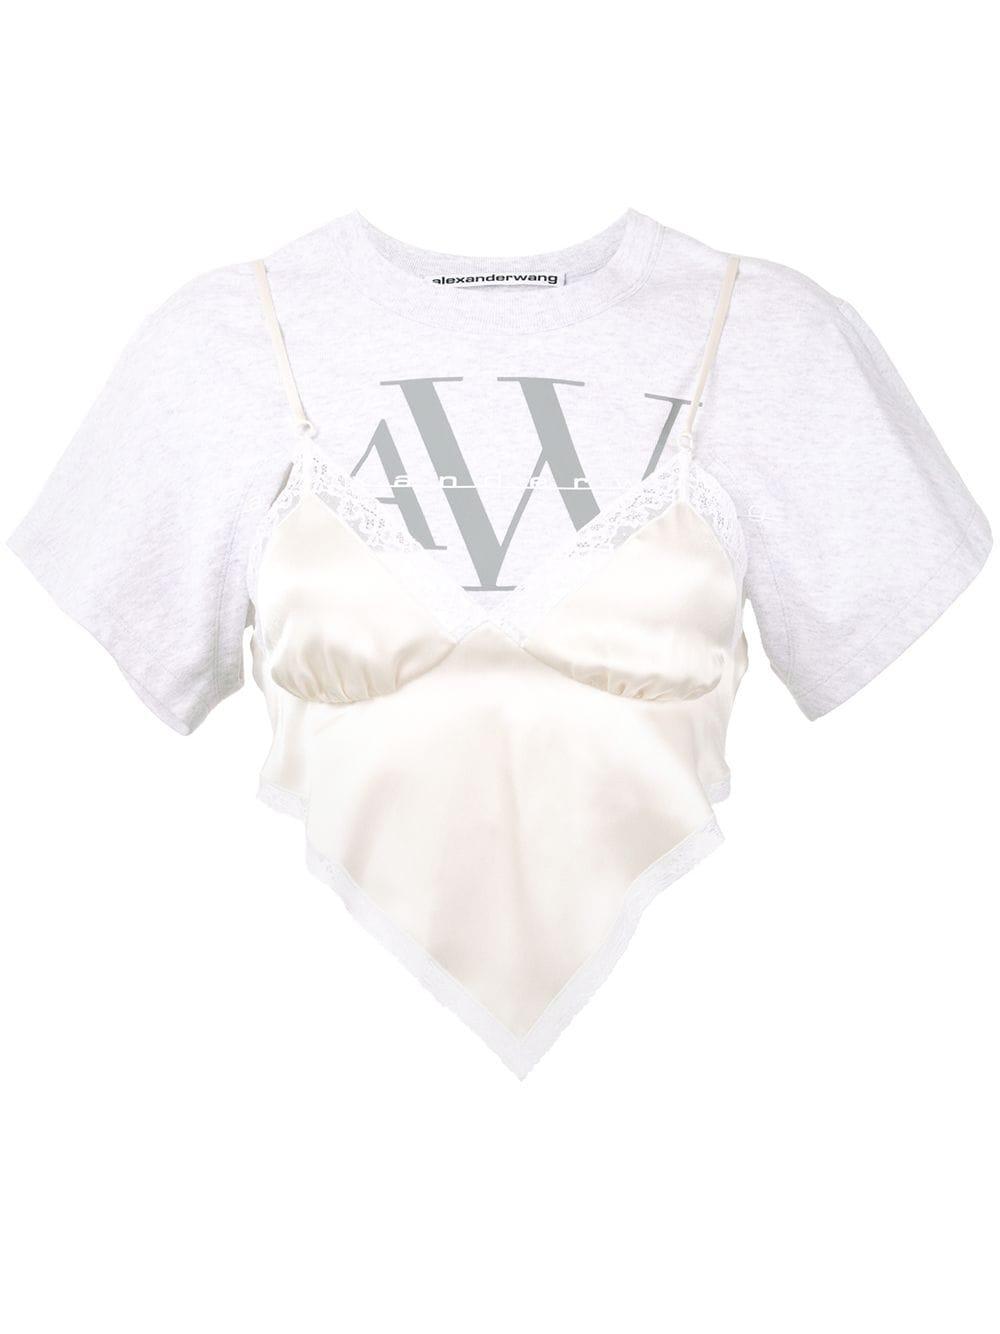 Alexander Wang Layered Camisole T-shirt in White | Lyst